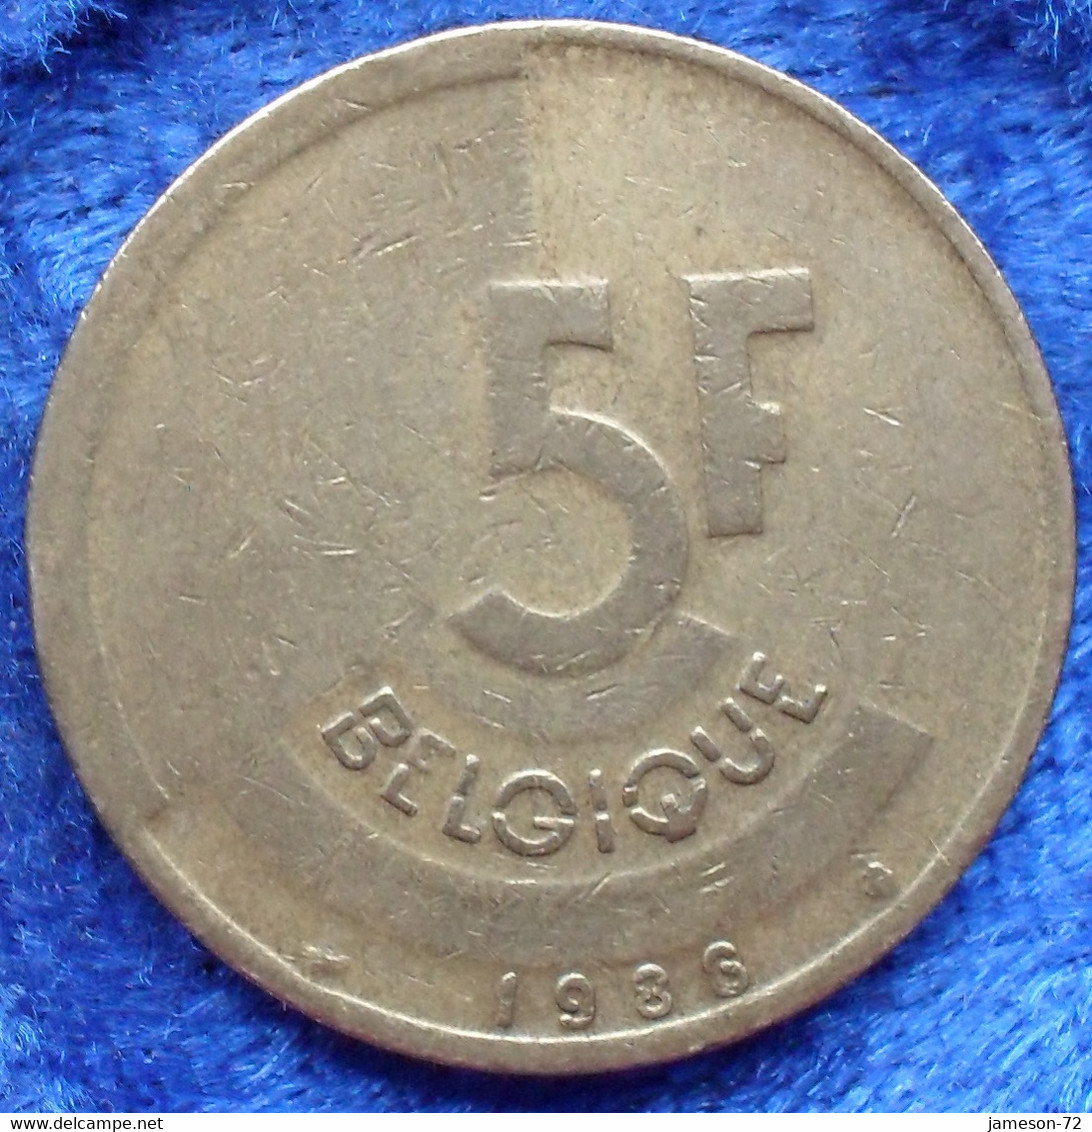 BELGIUM - 5 Francs 1986 French KM#163 Baudouin I (1951-1993) - Edelweiss Coins - Unclassified